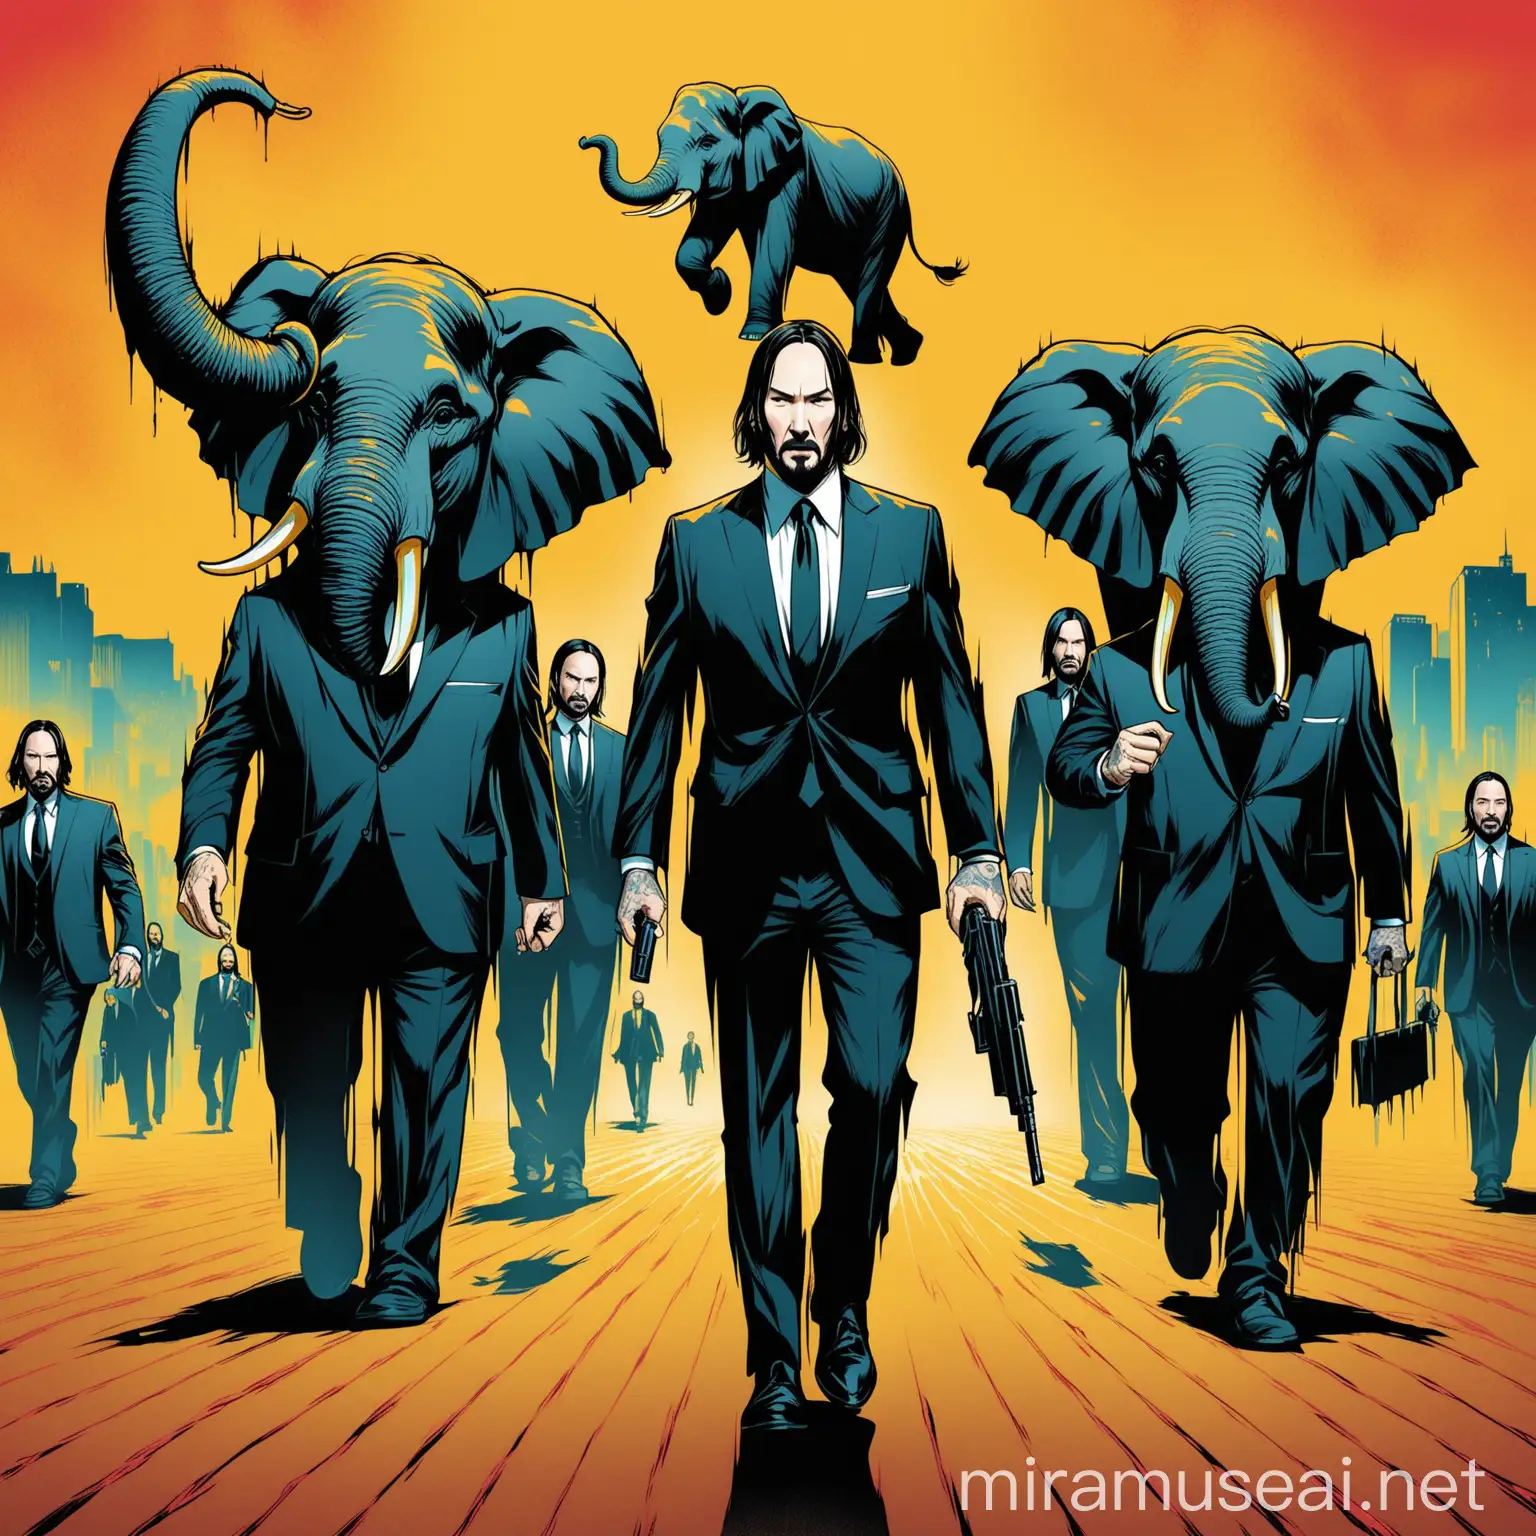 Poster for johnwick with characters as elephants in the style of dali